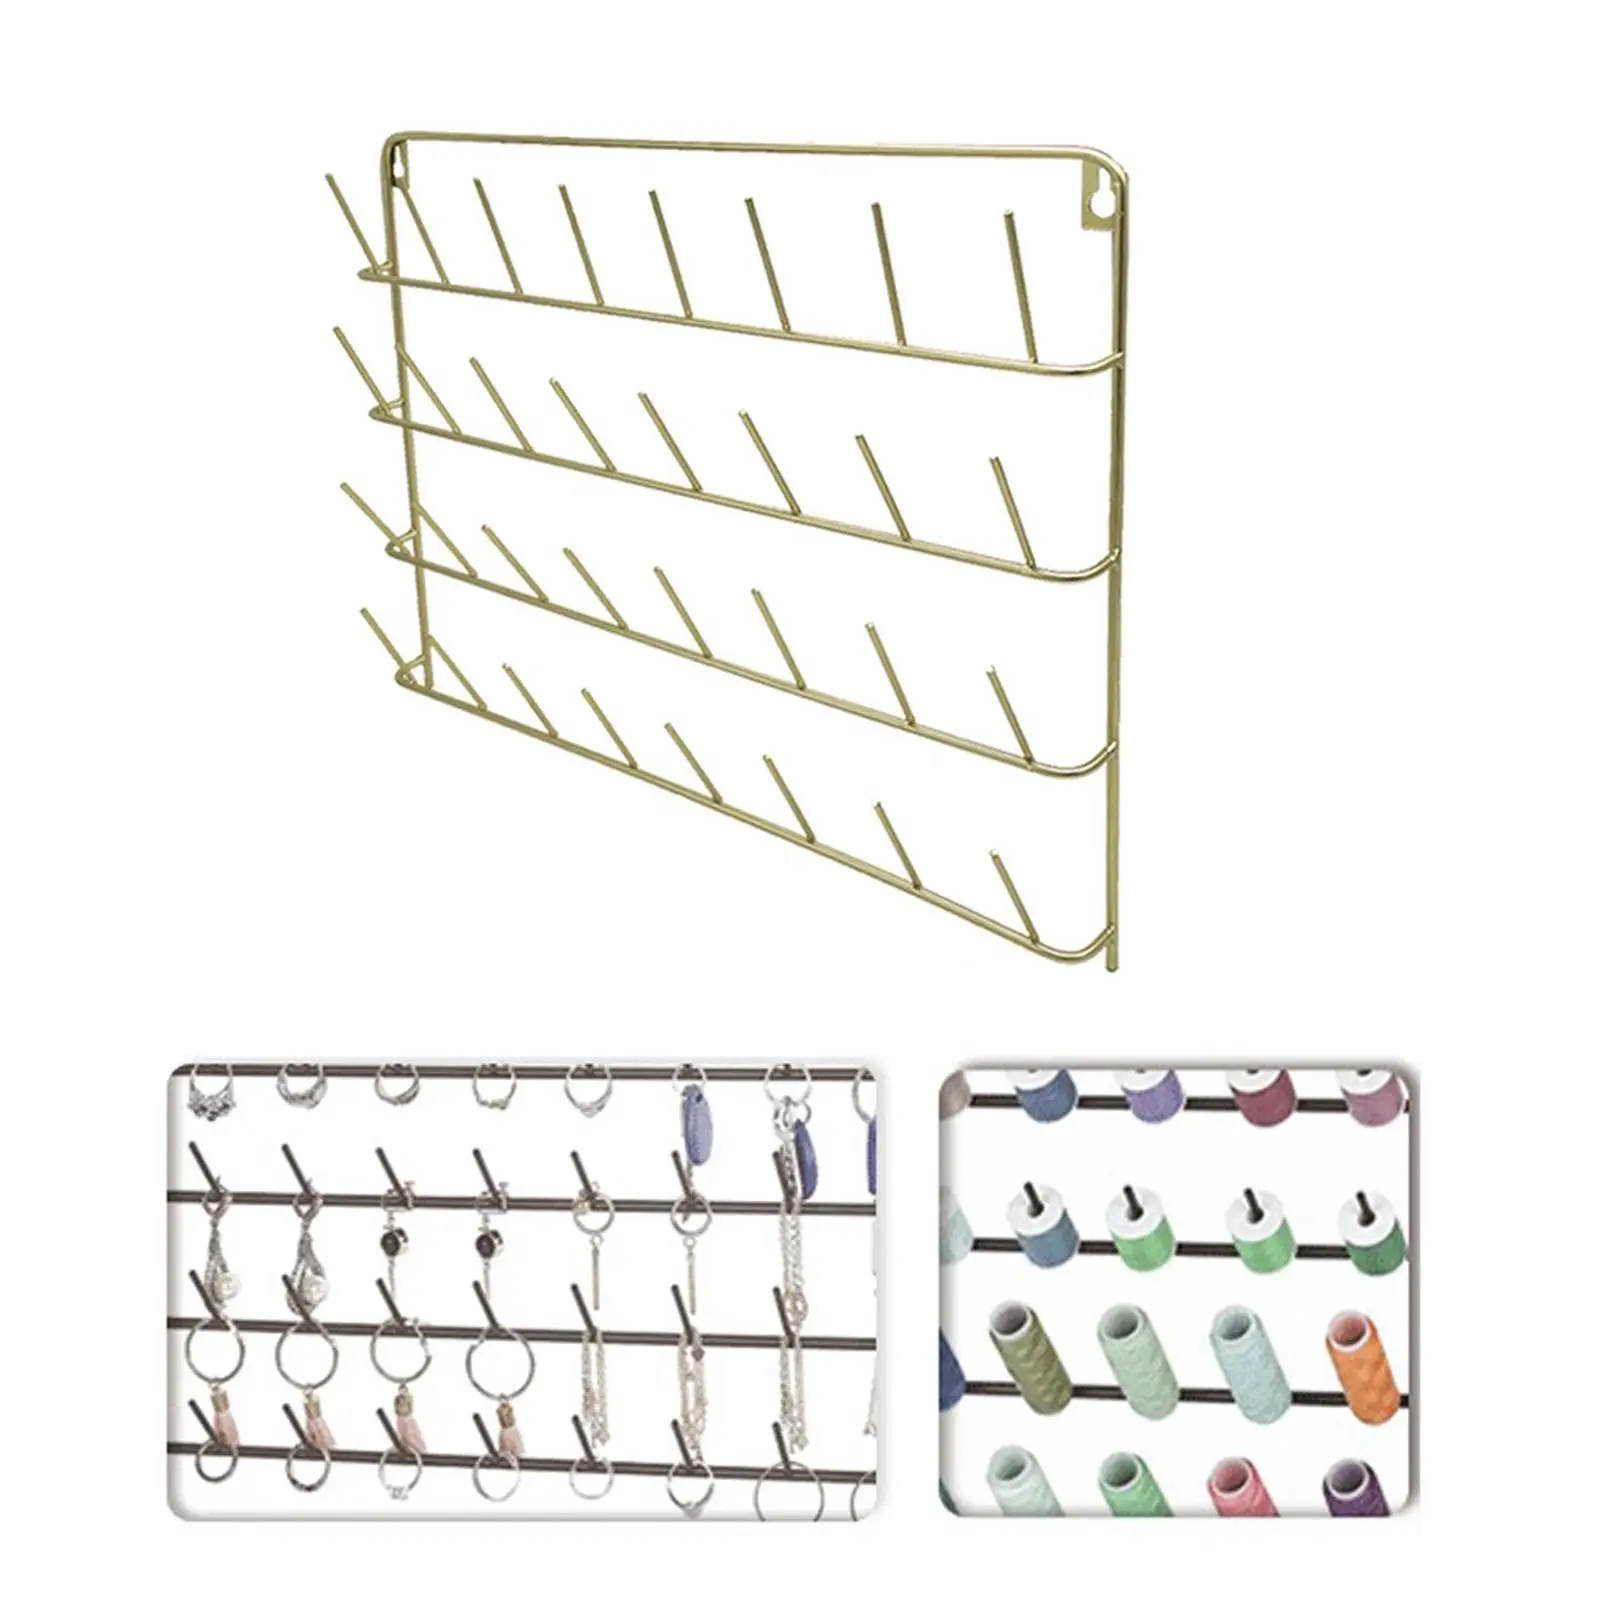 Large Sewing Thread Rack Wall Mount Accessories Gold Hanging Tools Seperator Organizer Thread Holder for Sewing Hair Braiding